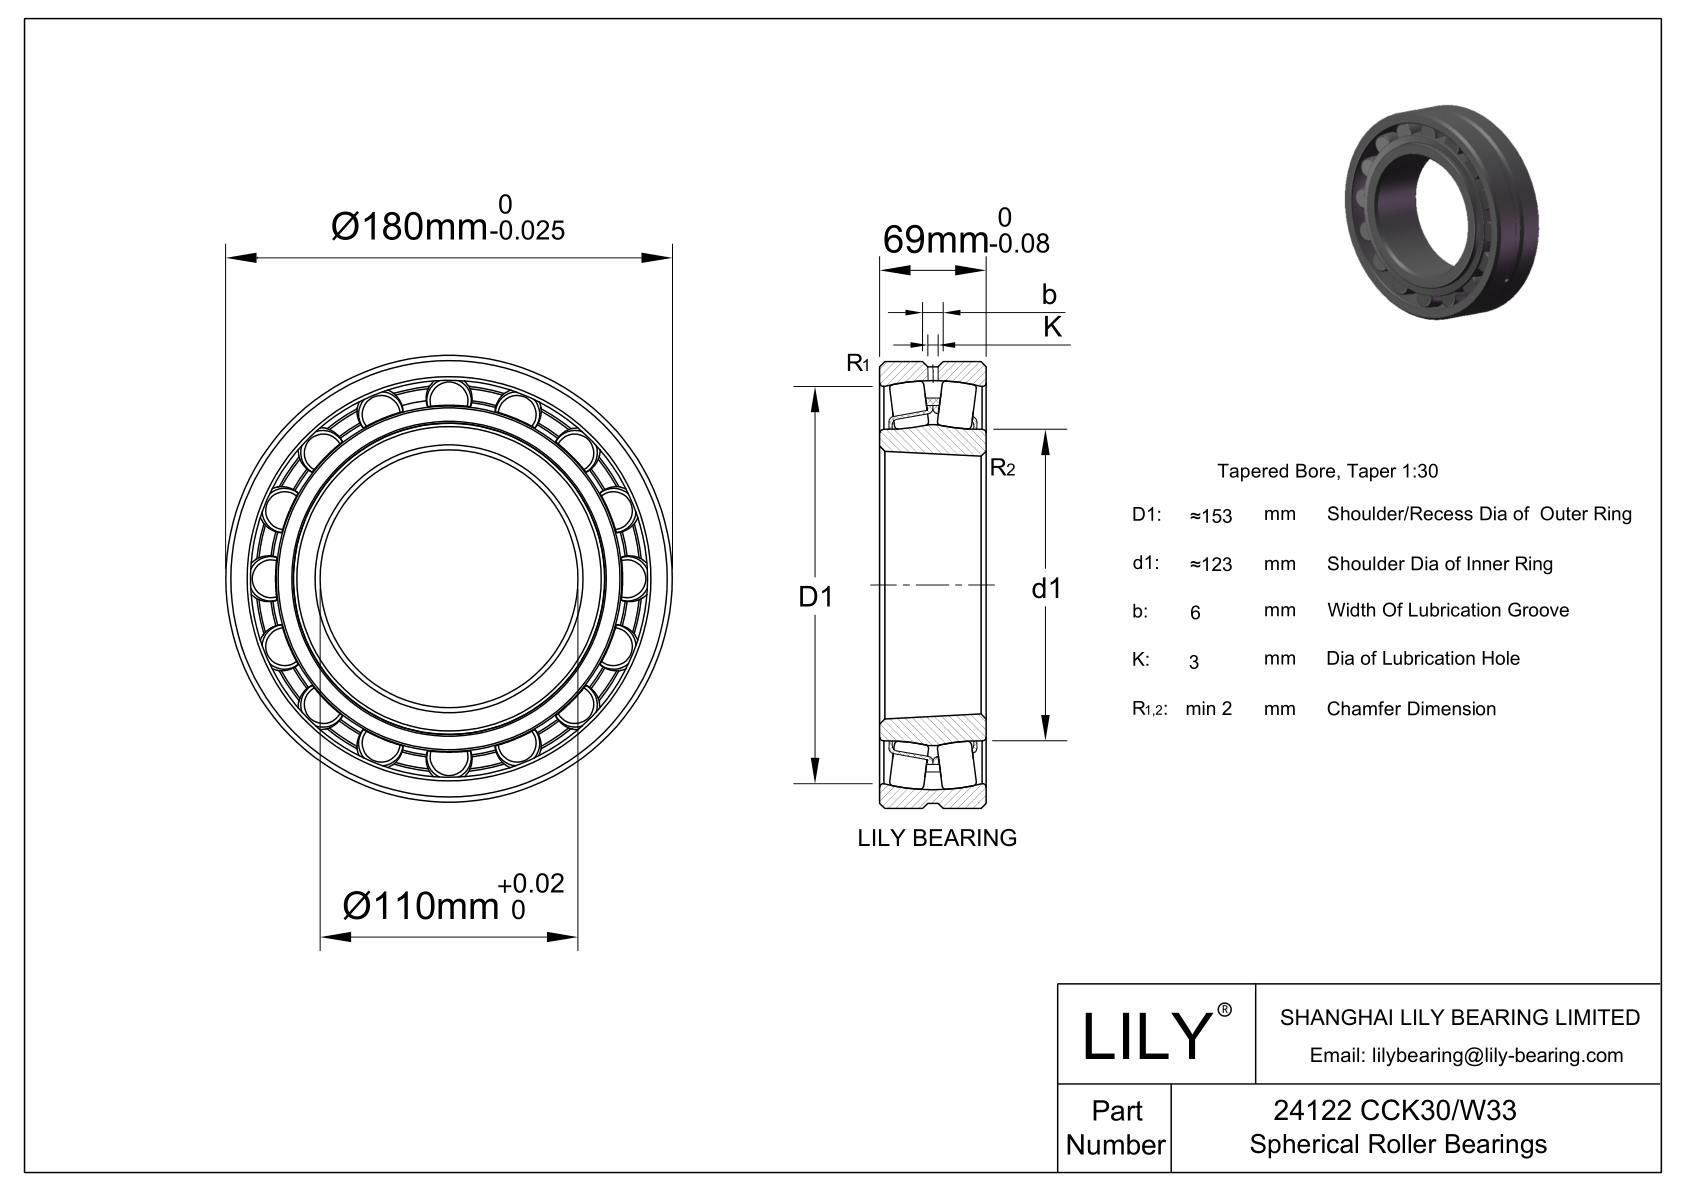 24122 CCK30/W33 Double Row Spherical Roller Bearing cad drawing